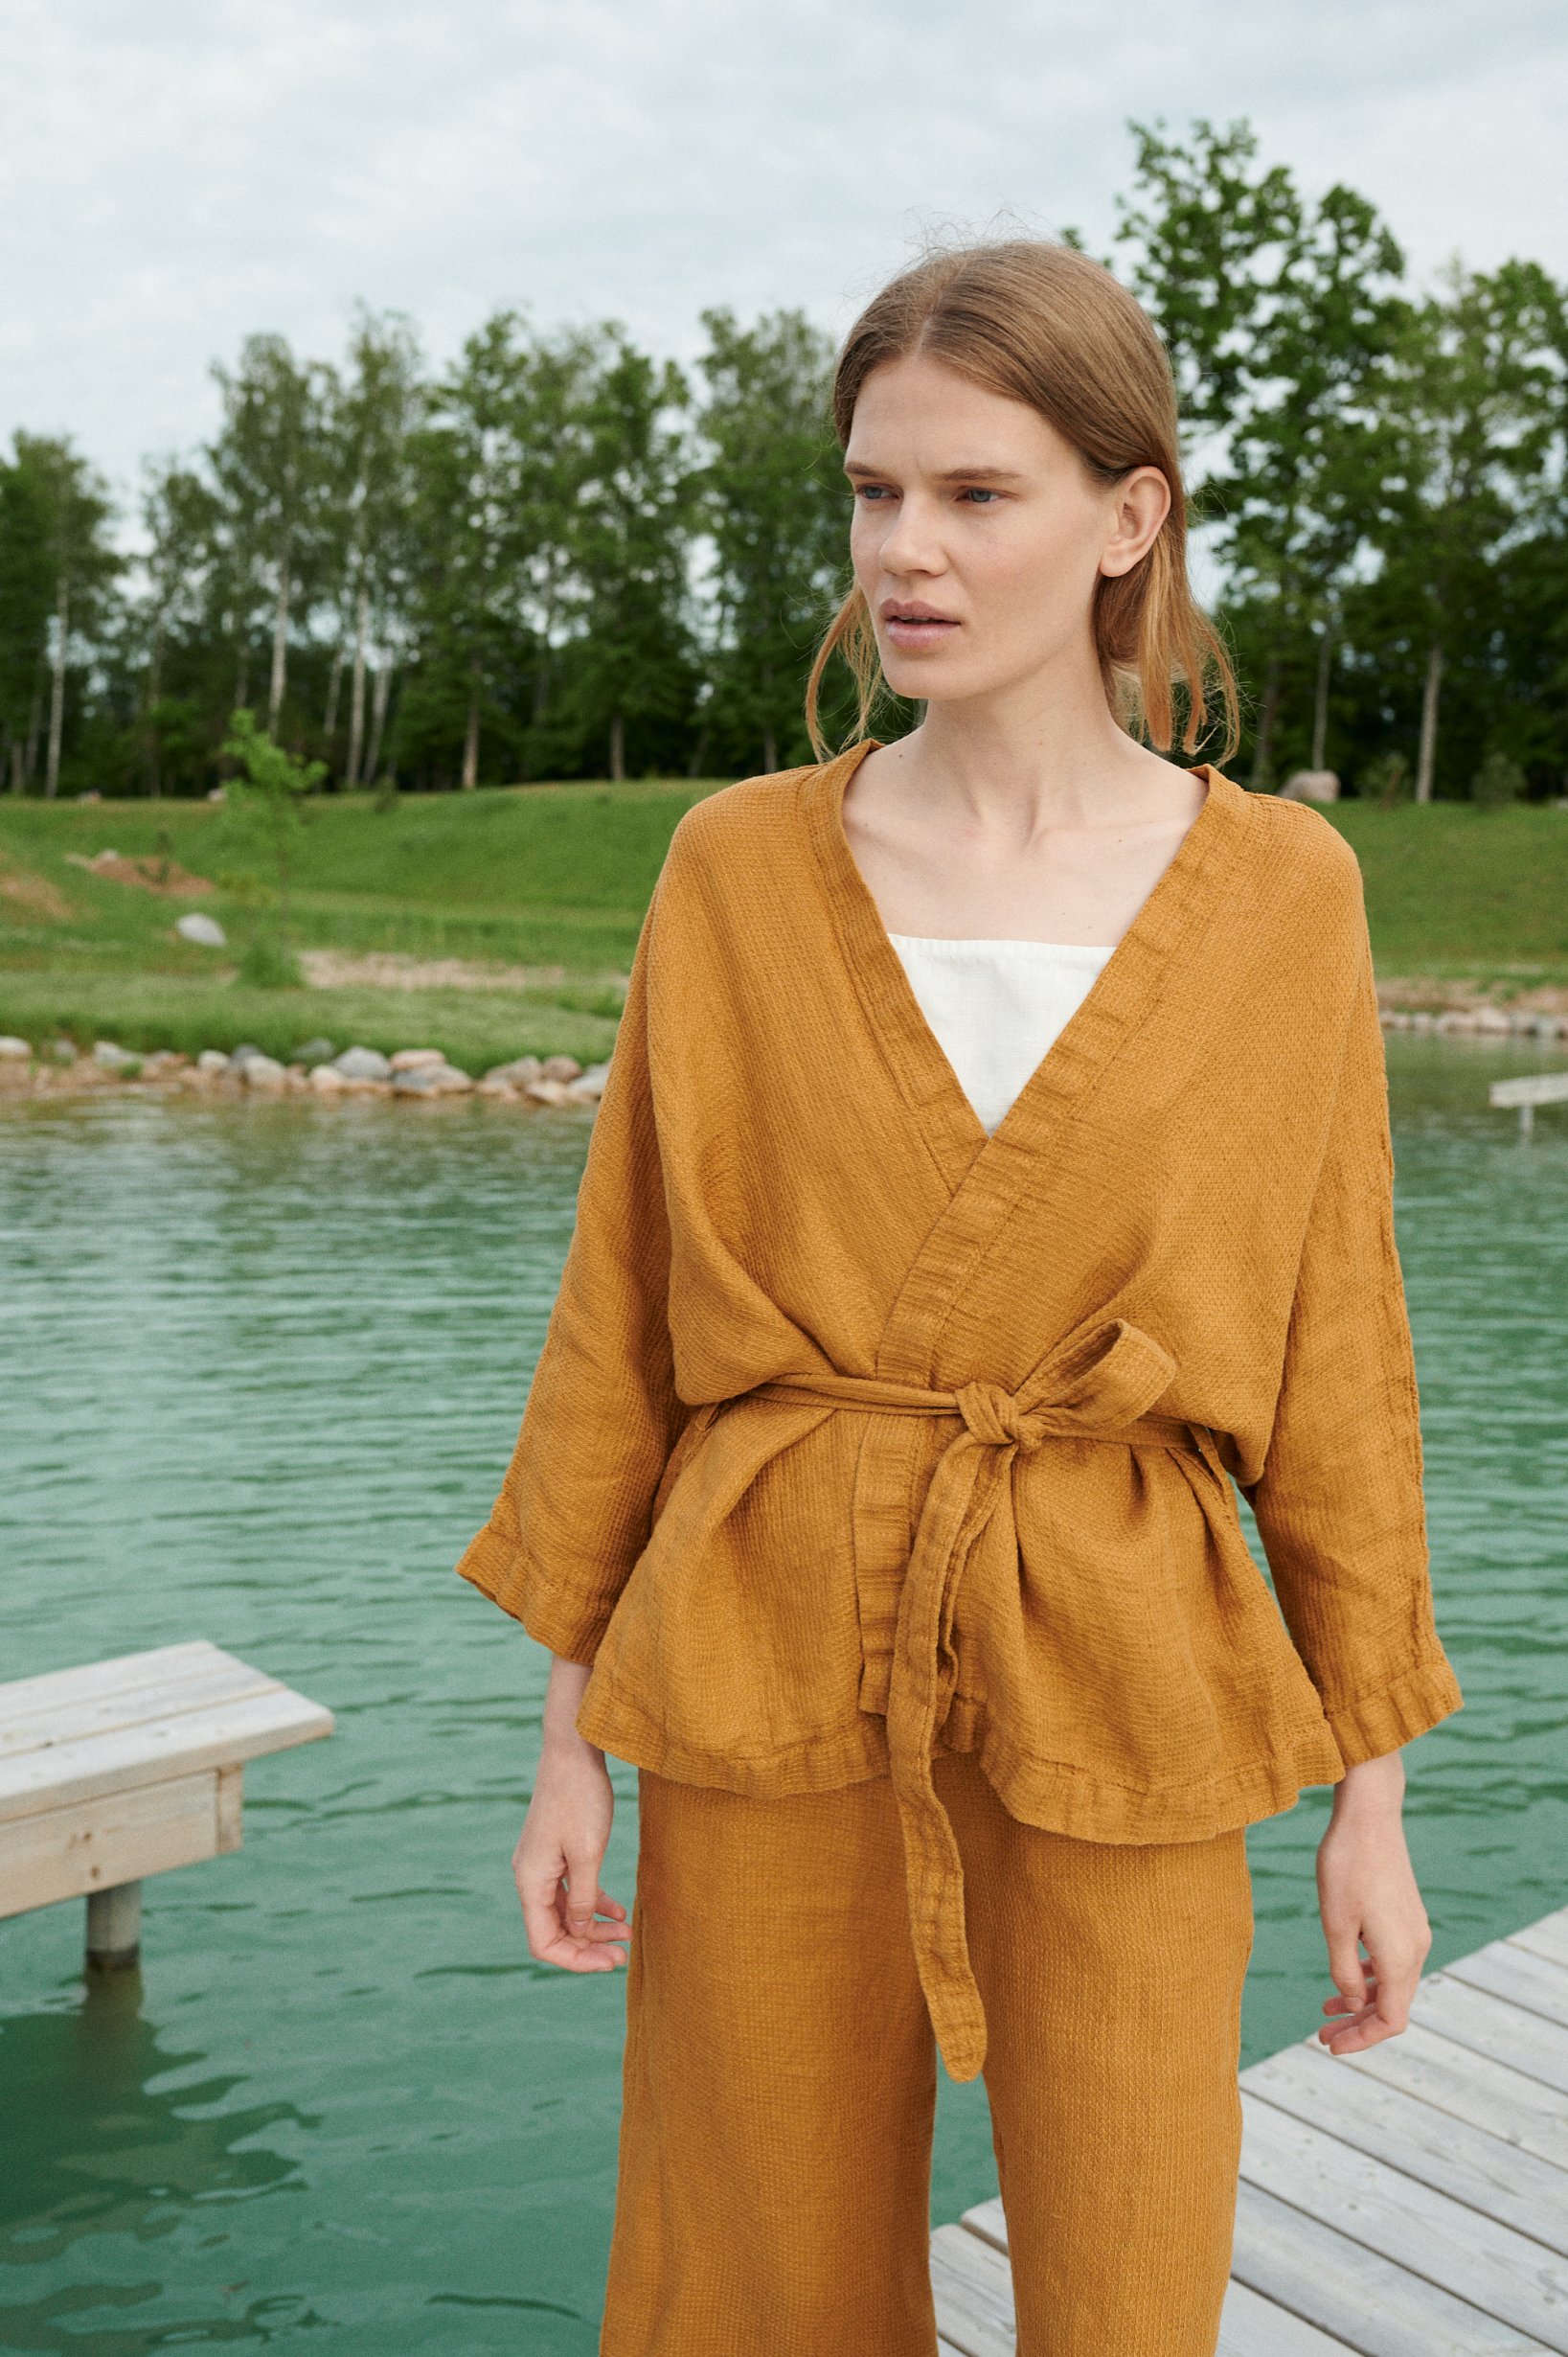 Model in an oversized waffle-like textured linen jacket with a belt